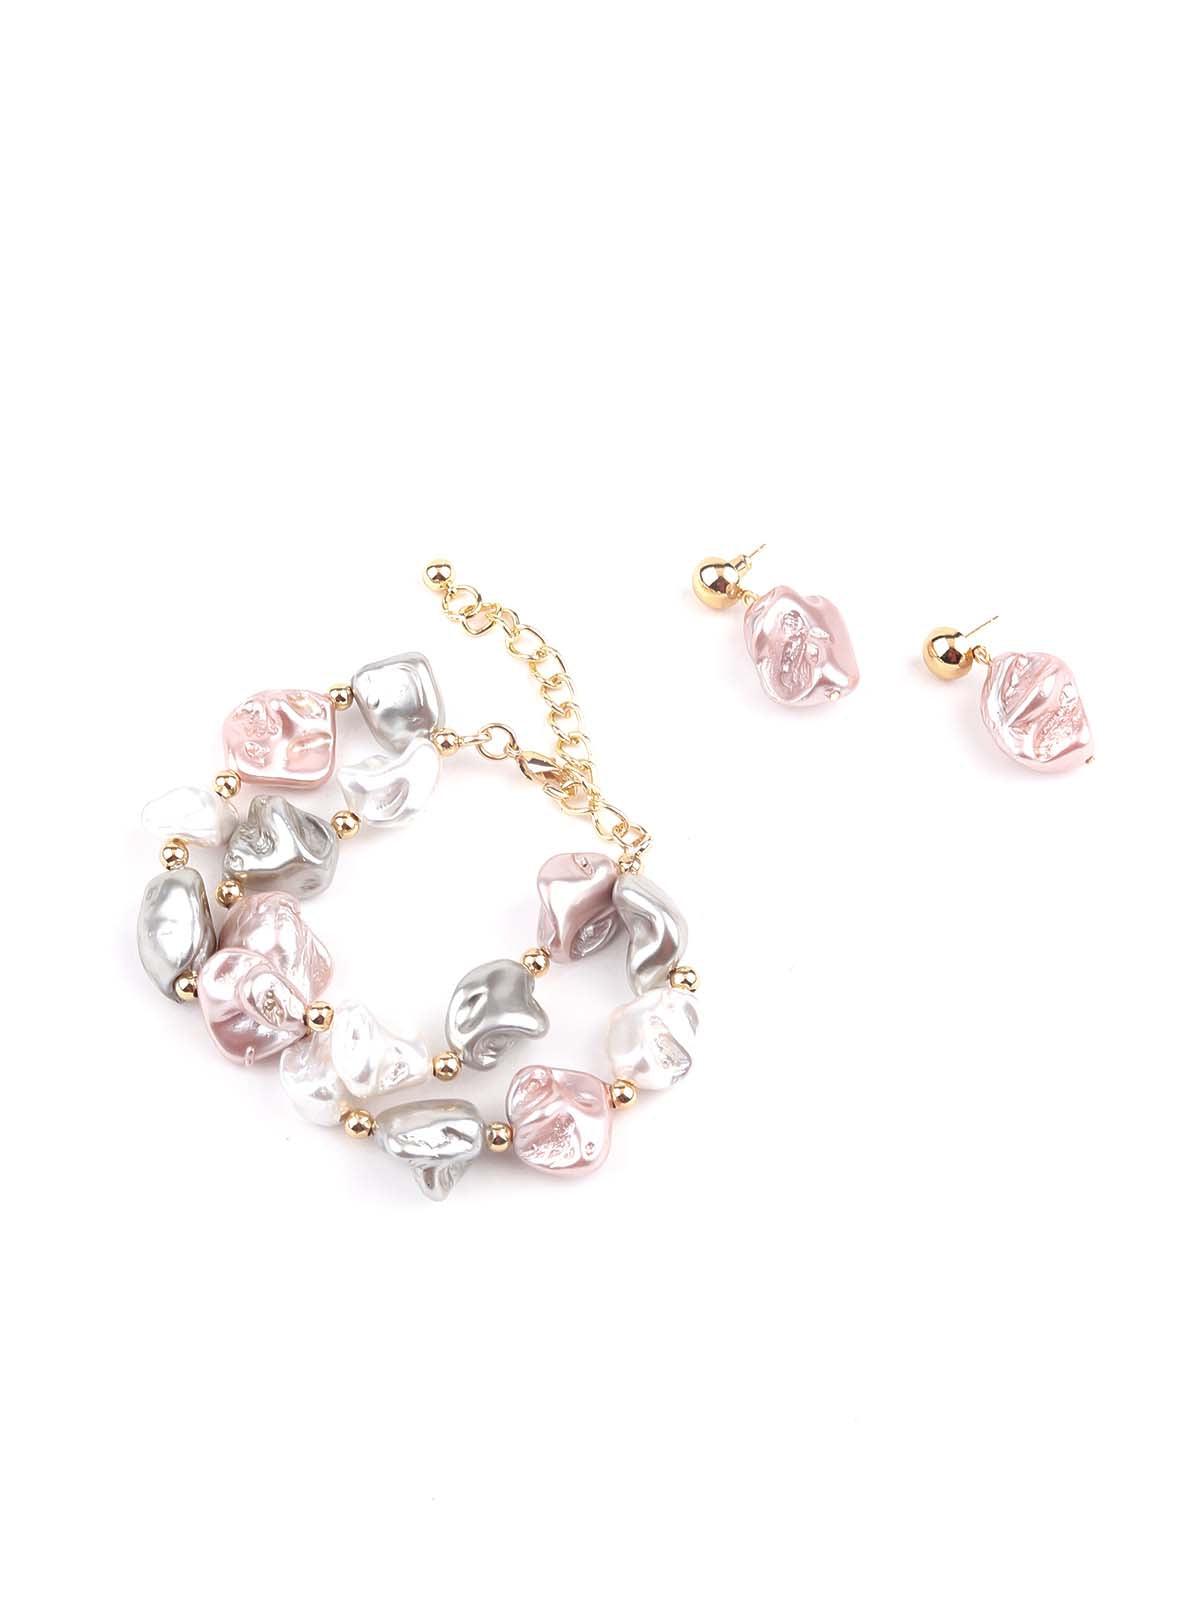 Women's Exquisite Gold Tone Artifical Stone Jewellery Set - Odette